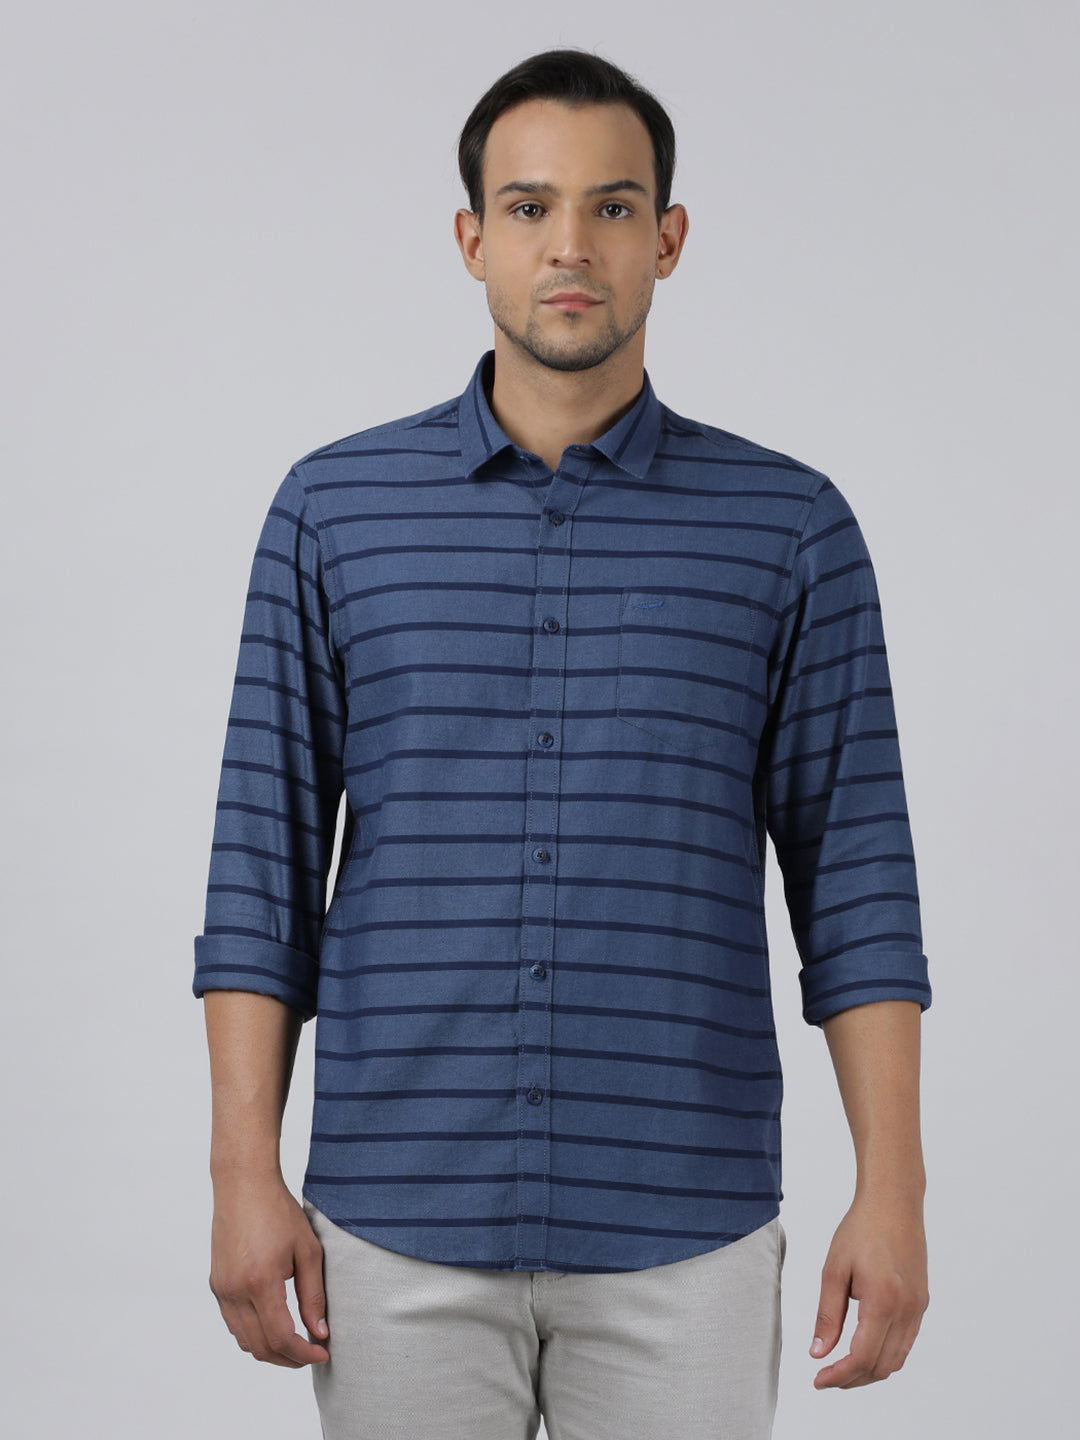 Casual Navy Full Sleeve Regular Fit Stripe Shirt with Collar for Men